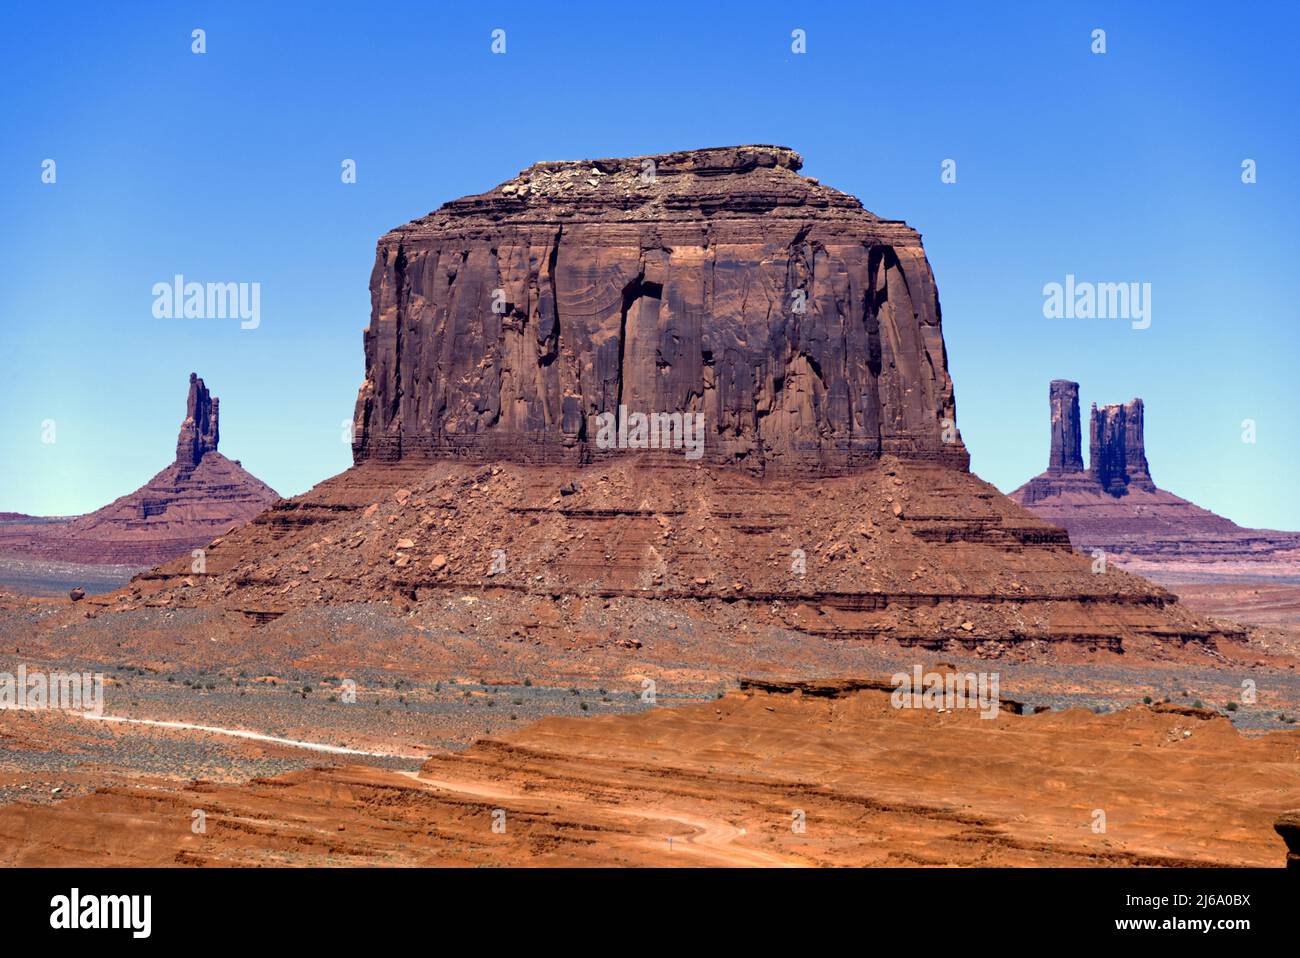 Monument Valley - John Ford's Point Foto Stock